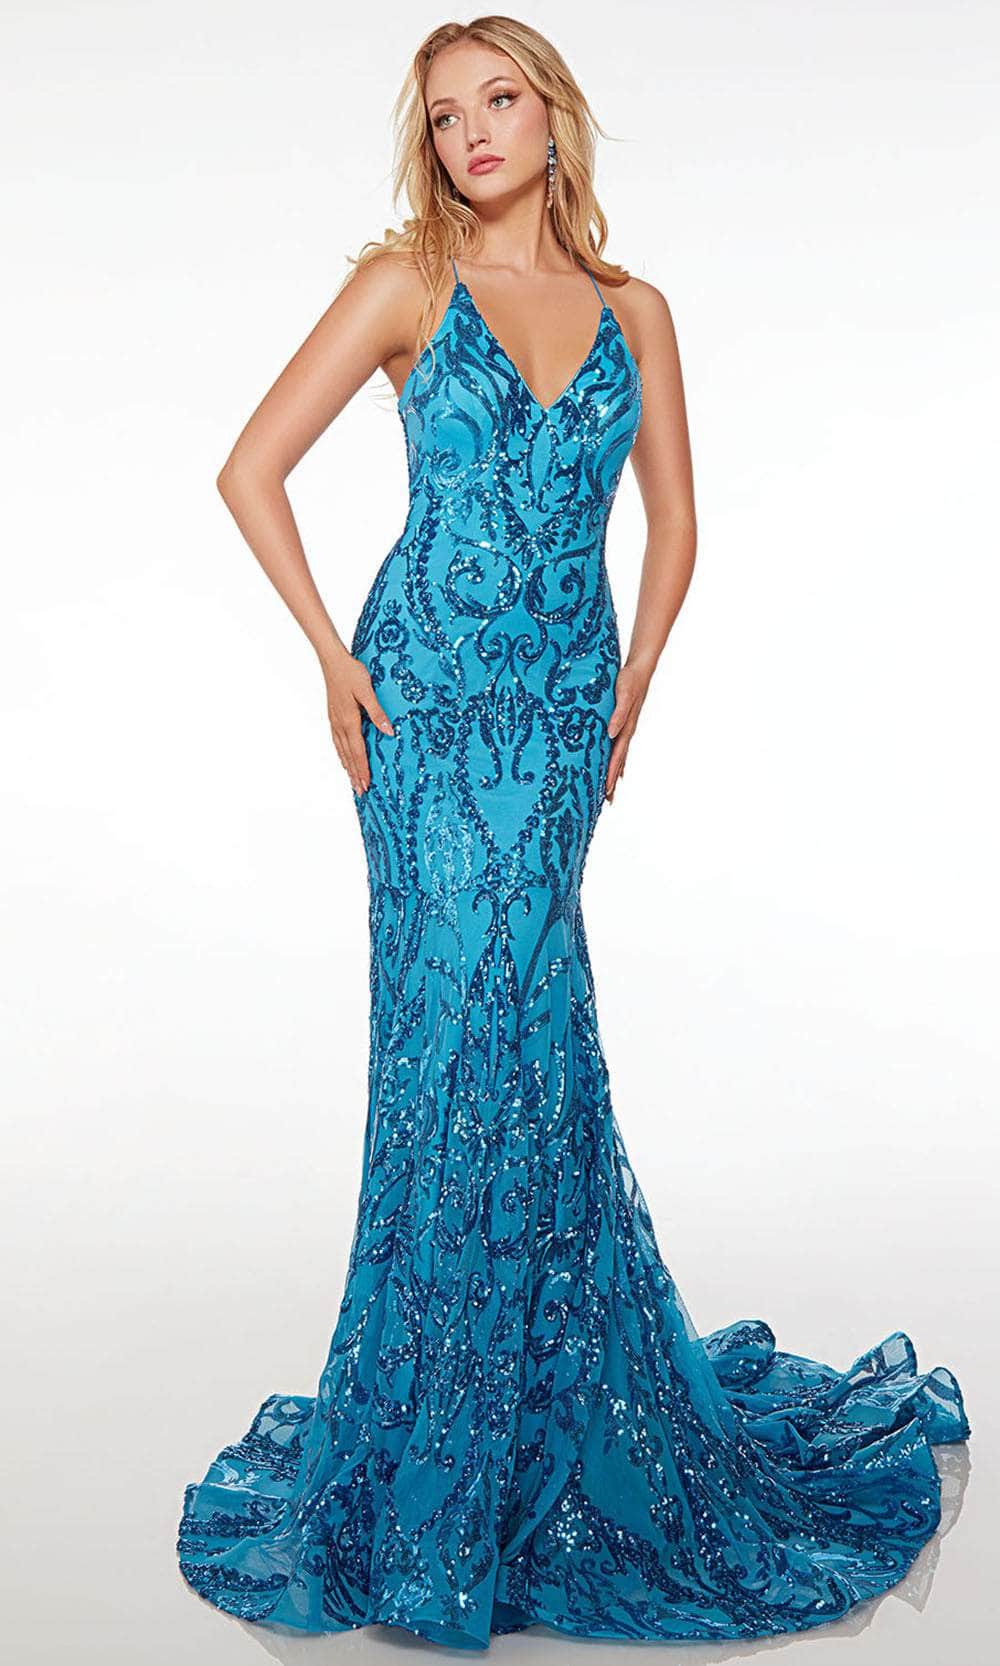 Alyce Paris 61495 - Sequin Motif Prom Dress Special Occasion Dress 000 / Turquoise